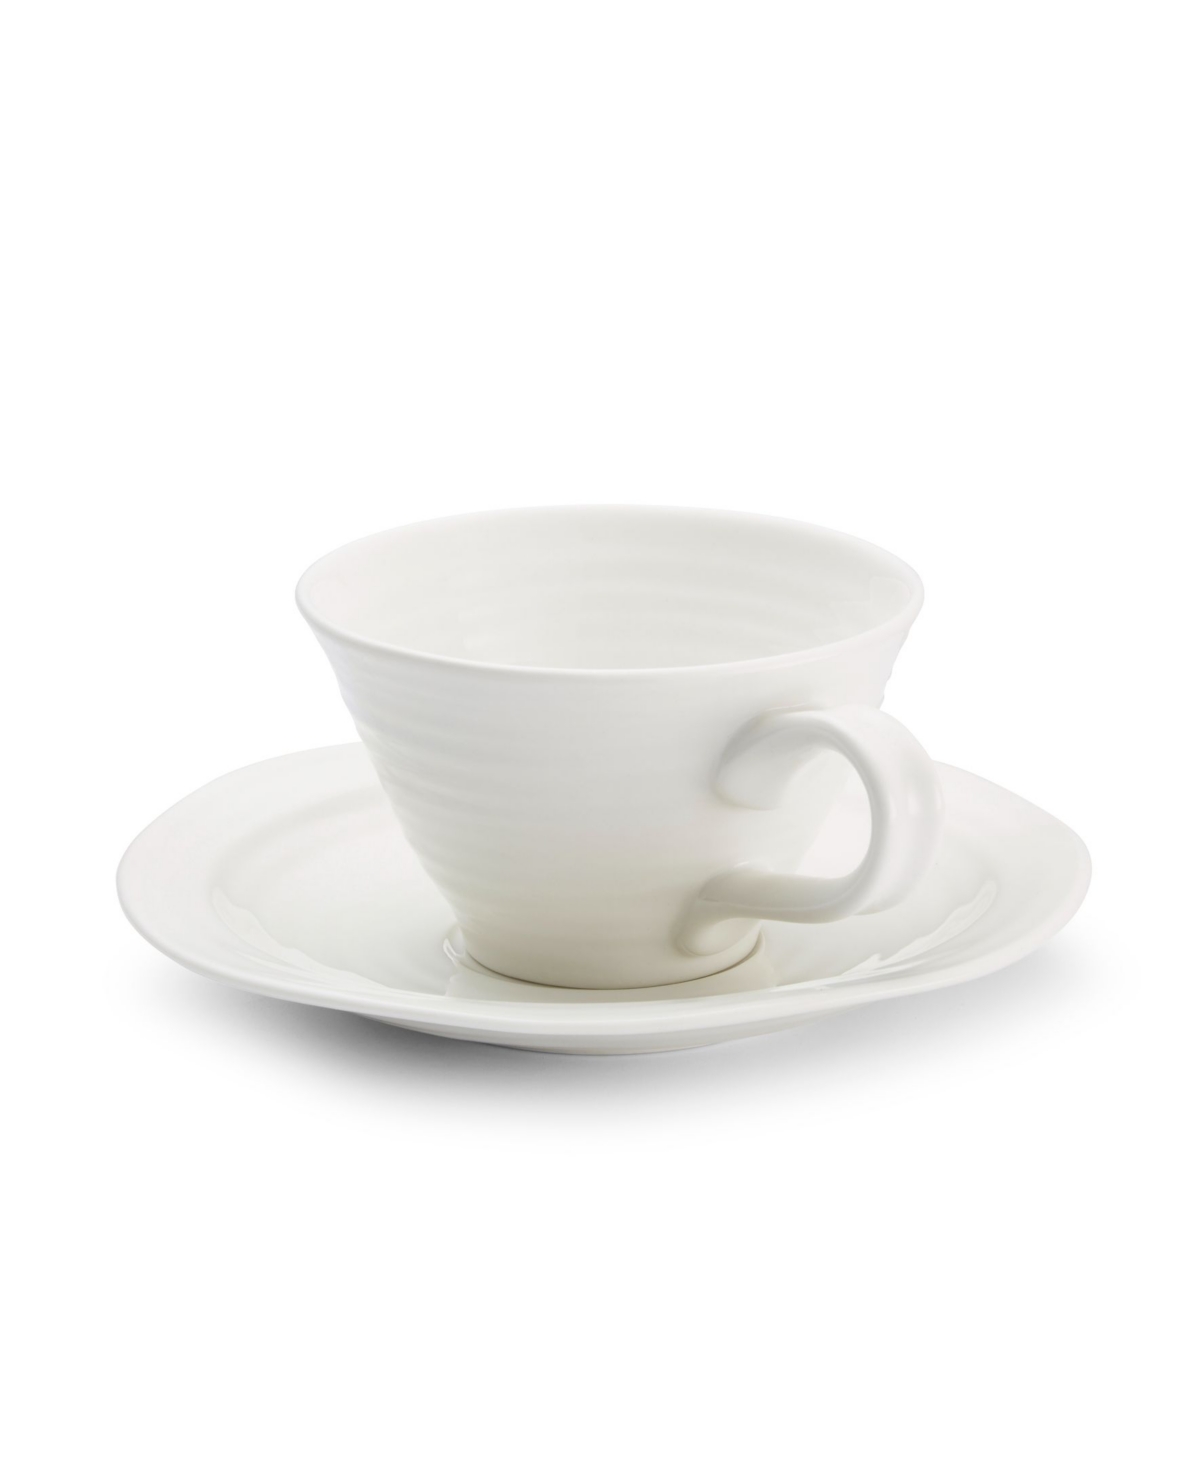 Portmeirion Sophie Conran Teacups And Saucers, Set Of 4 In White